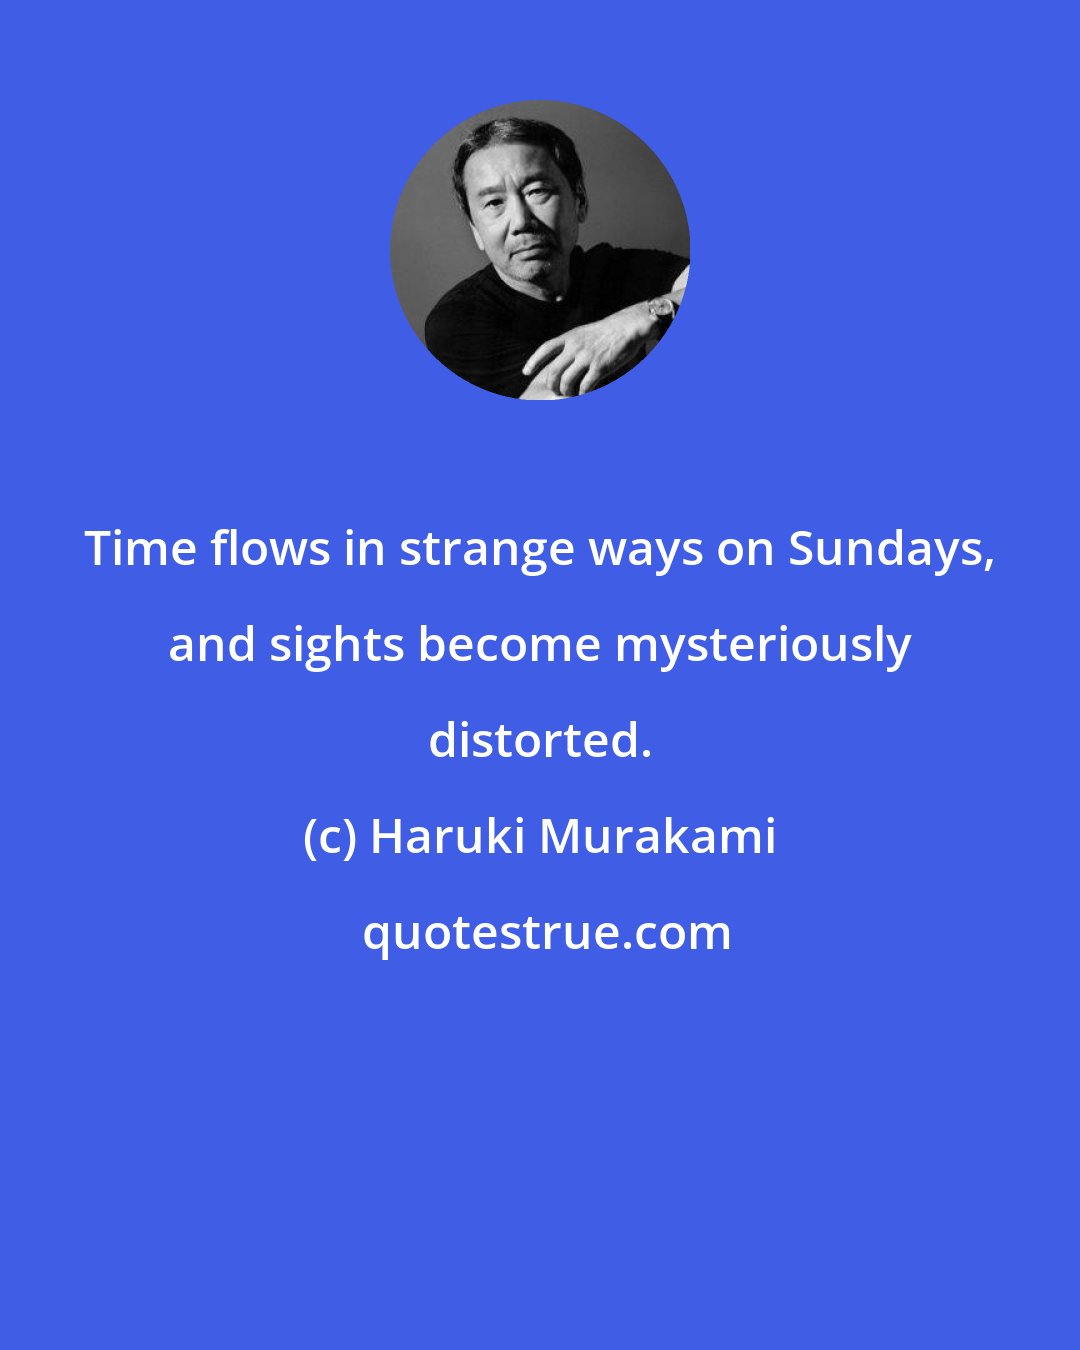 Haruki Murakami: Time flows in strange ways on Sundays, and sights become mysteriously distorted.